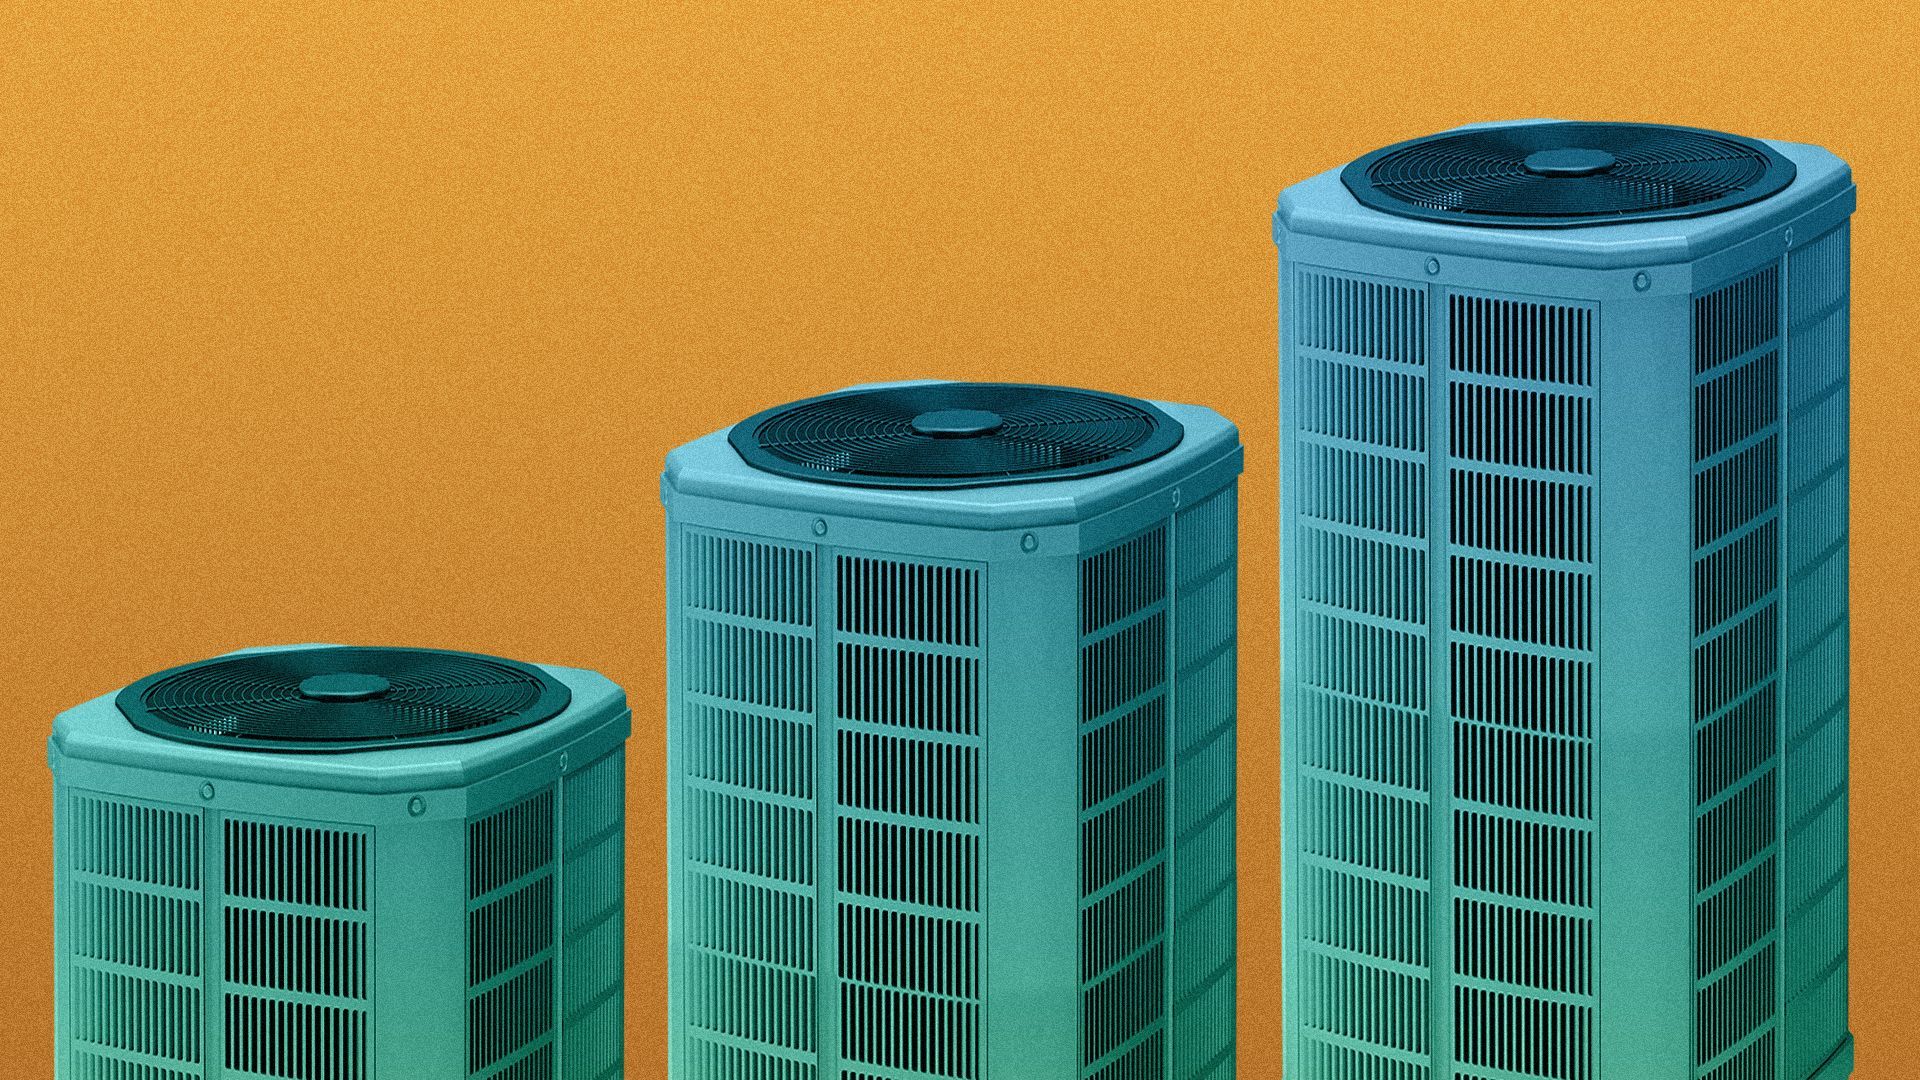 Illustration of a bar chart made of air conditioning units